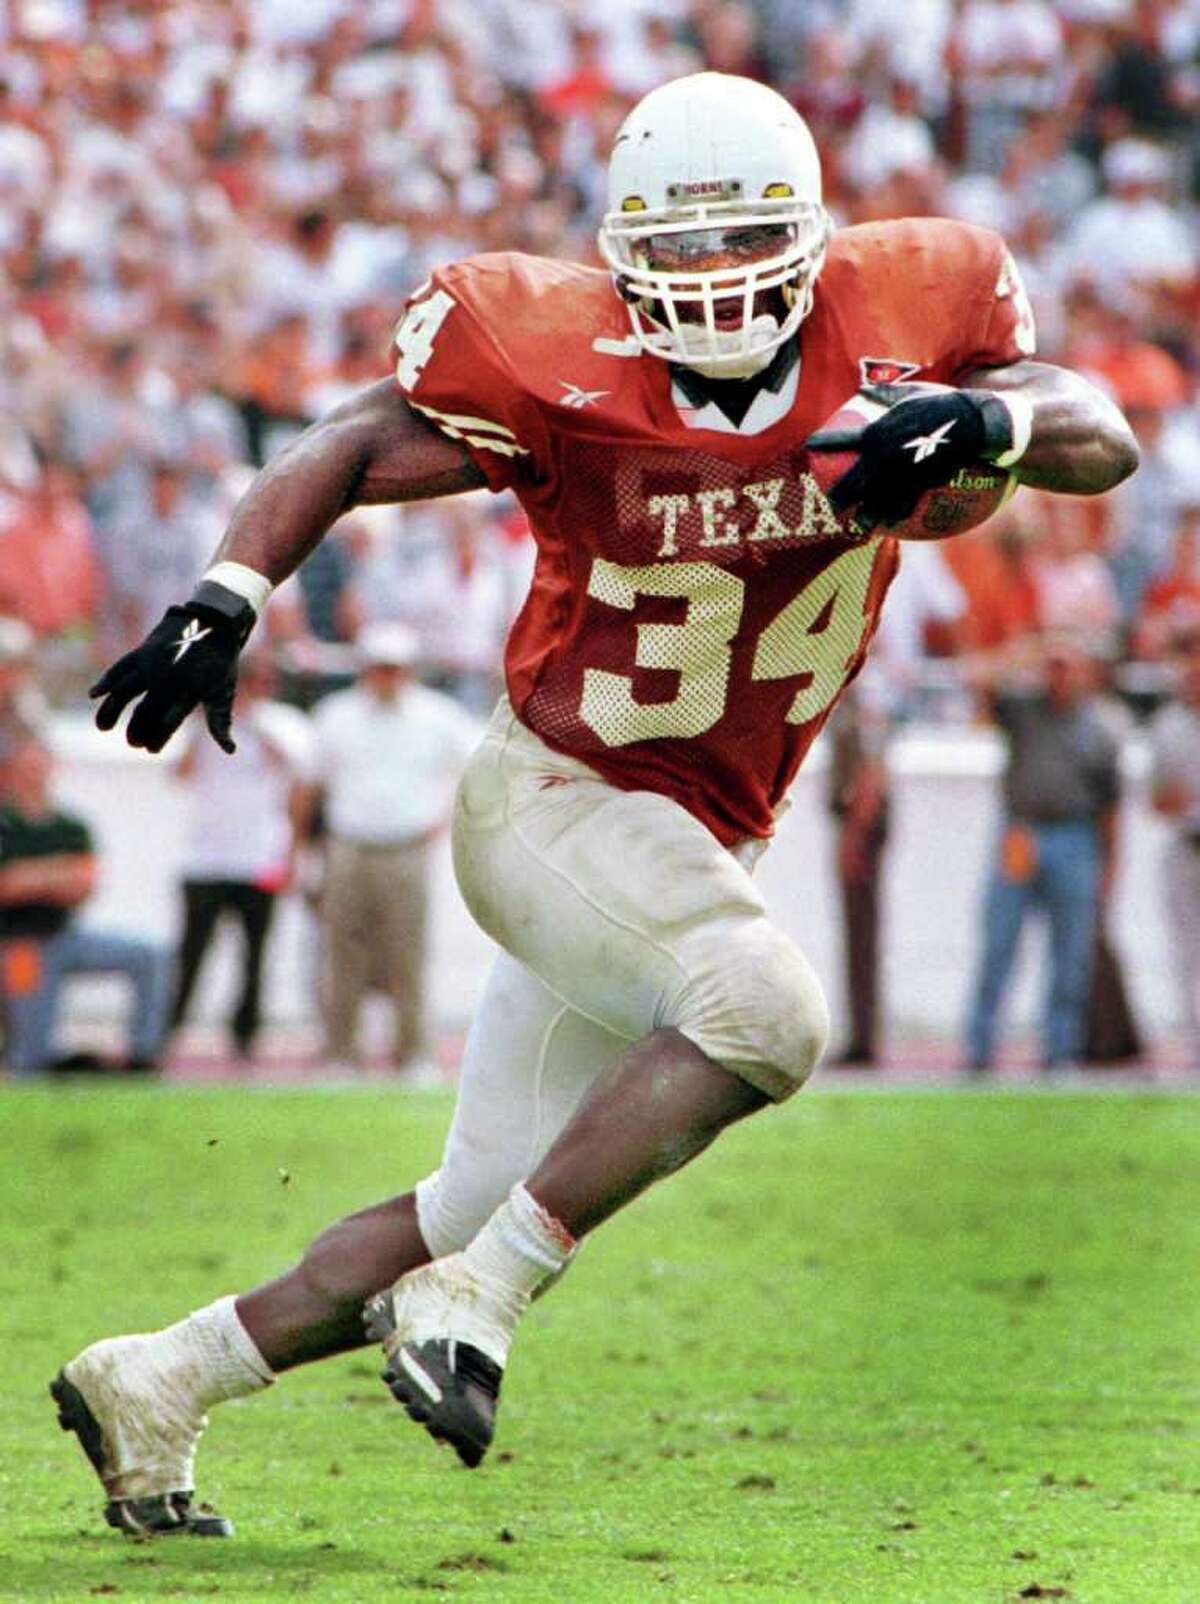 RICKY WILLIAMS, #34, Texas Longhorns running back. PHOTO: Special to the Express-News (from UT photos)